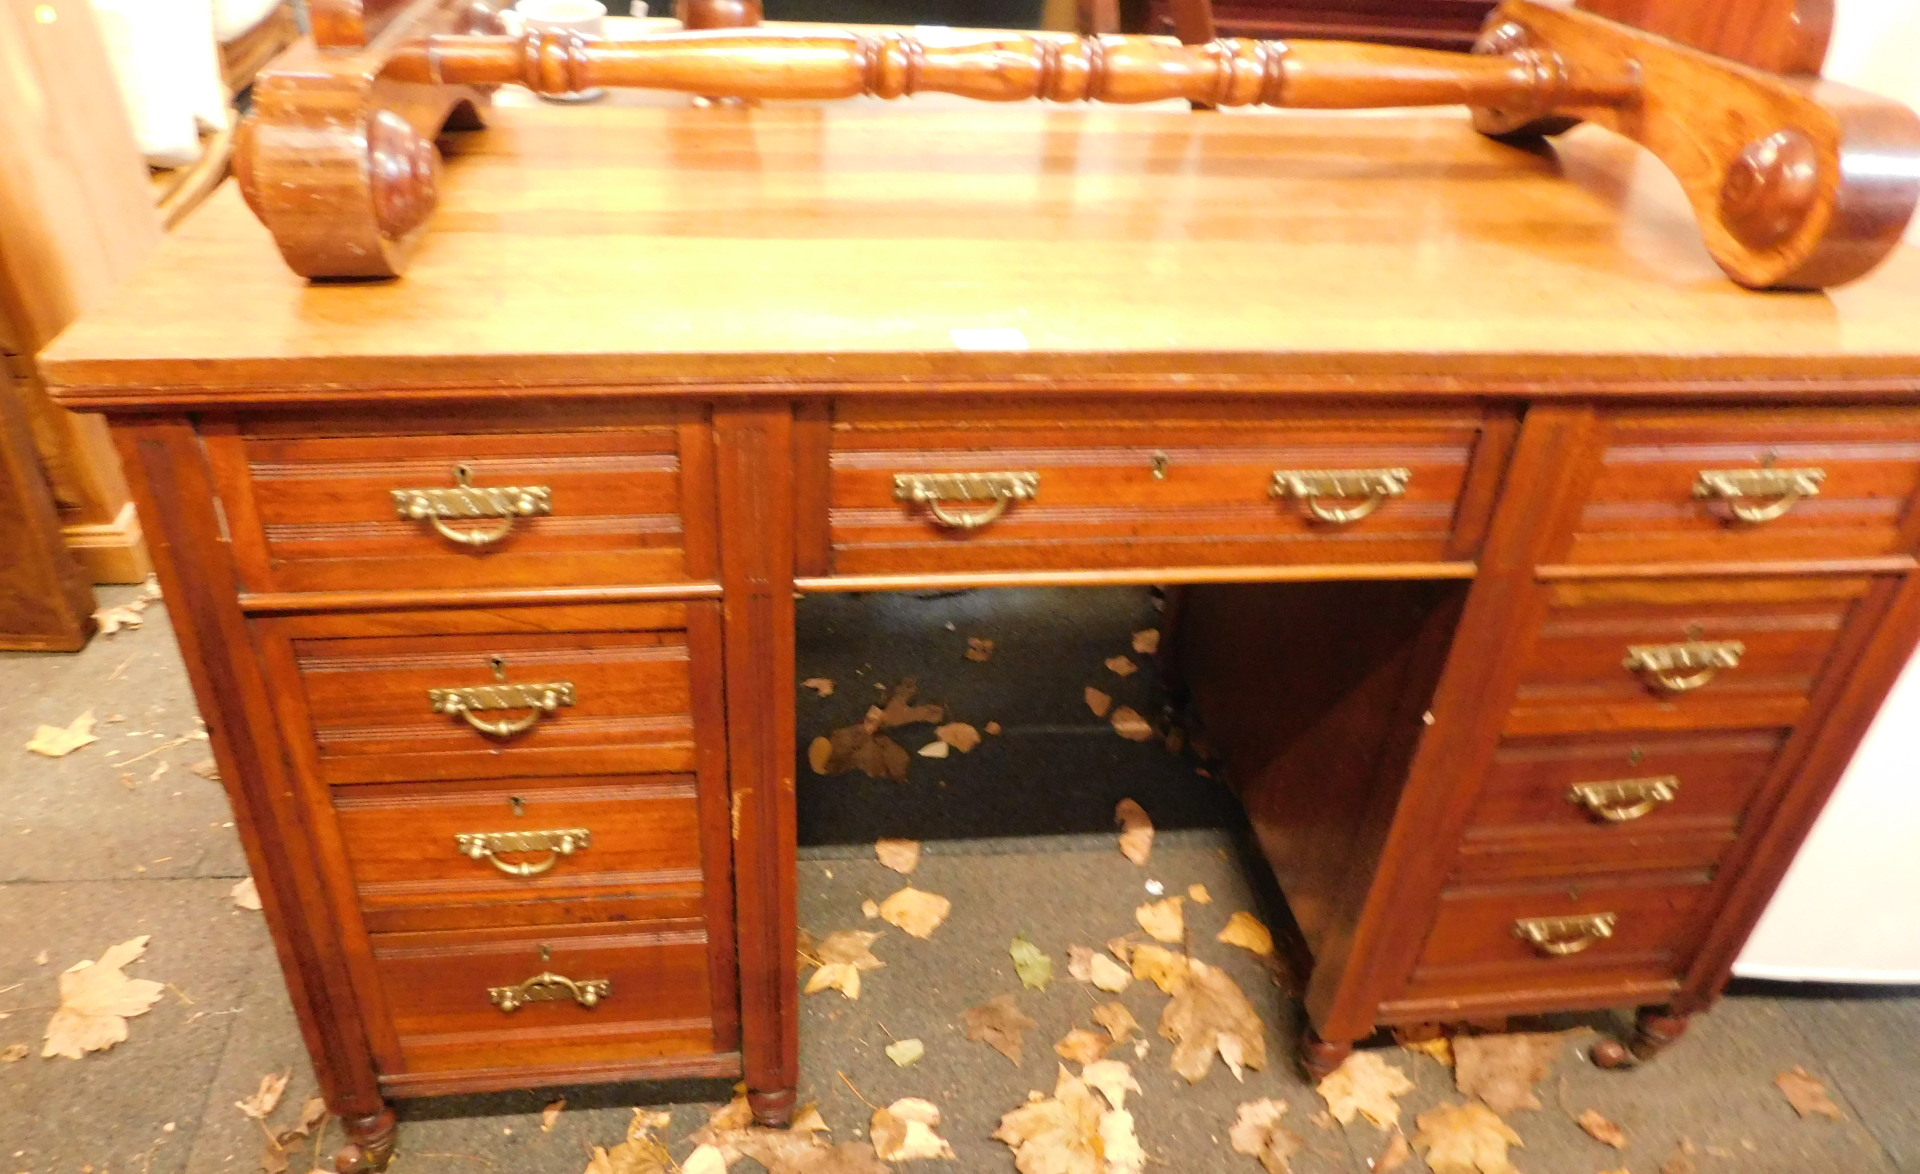 An Edwardian oak writing desk, with arrangement of four drawer pedestals and single central door, on